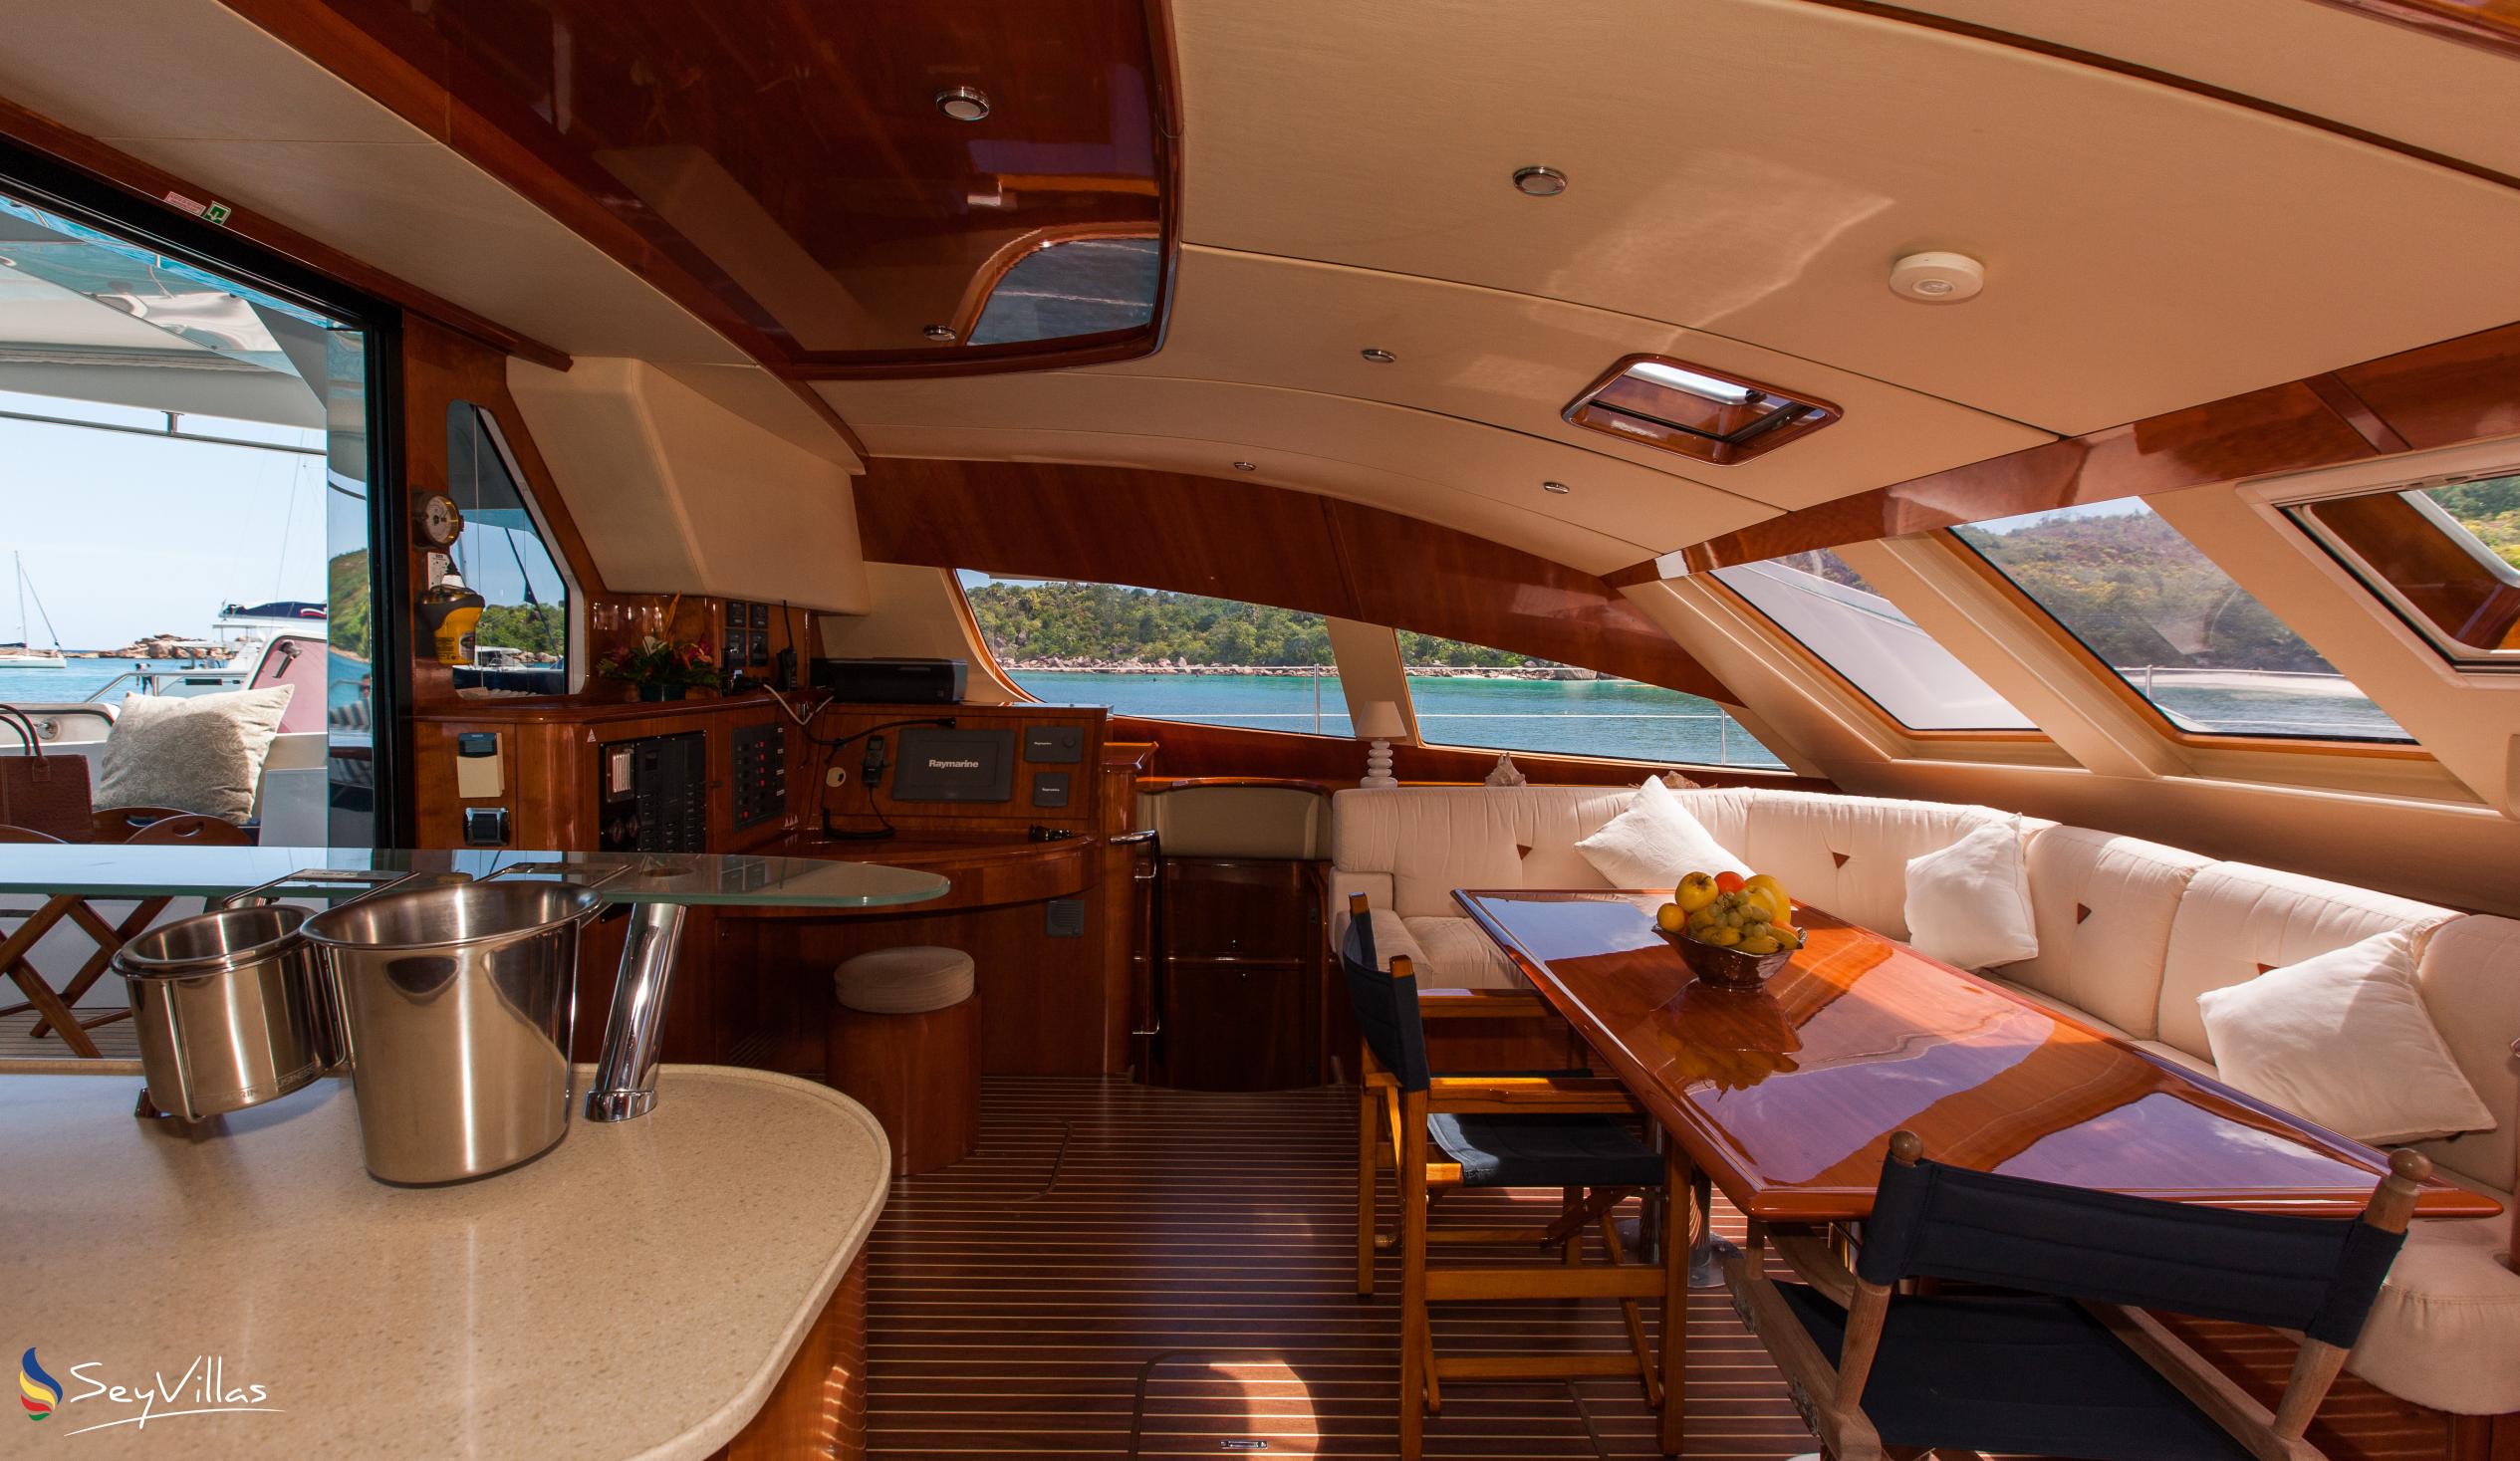 Foto 85: Seyscapes Yacht Charter - Charter Complet Cirrus - Seychelles (Seychelles)